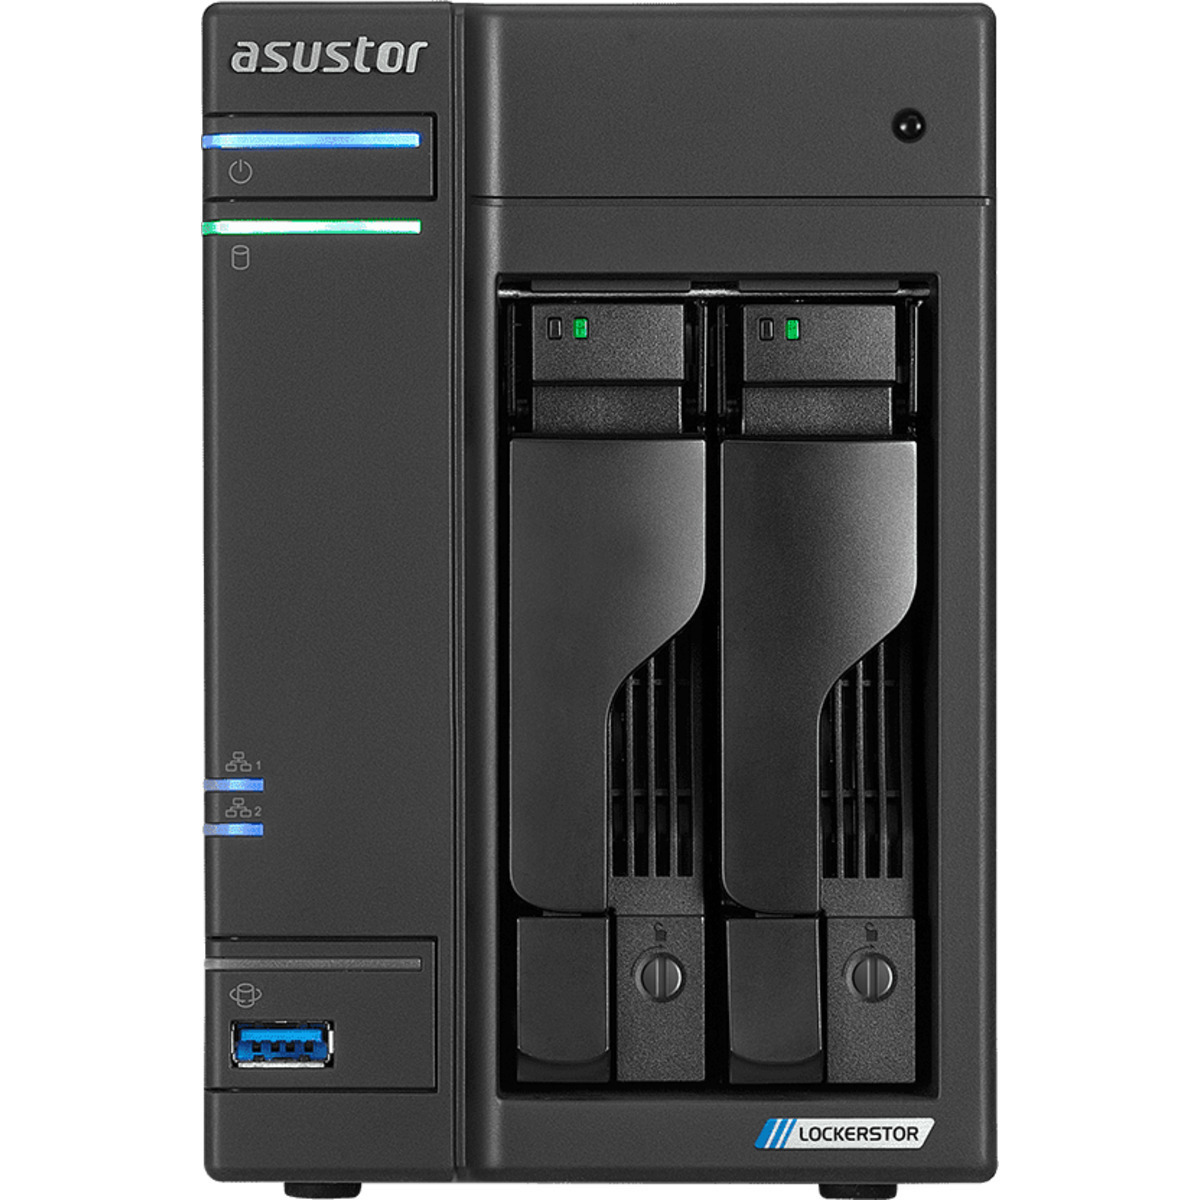 buy $860 ASUSTOR AS6602T Lockerstor 2 8tb Desktop NAS - Network Attached Storage Device 2x4000gb Western Digital Ultrastar DC HC310 HUS726T4TALE6L4 3.5 7200rpm SATA 6Gb/s HDD ENTERPRISE Class Drives Installed - Burn-In Tested - FREE RAM UPGRADE - nas headquarters buy network attached storage server device das new raid-5 free shipping usa christmas new year holiday sale AS6602T Lockerstor 2